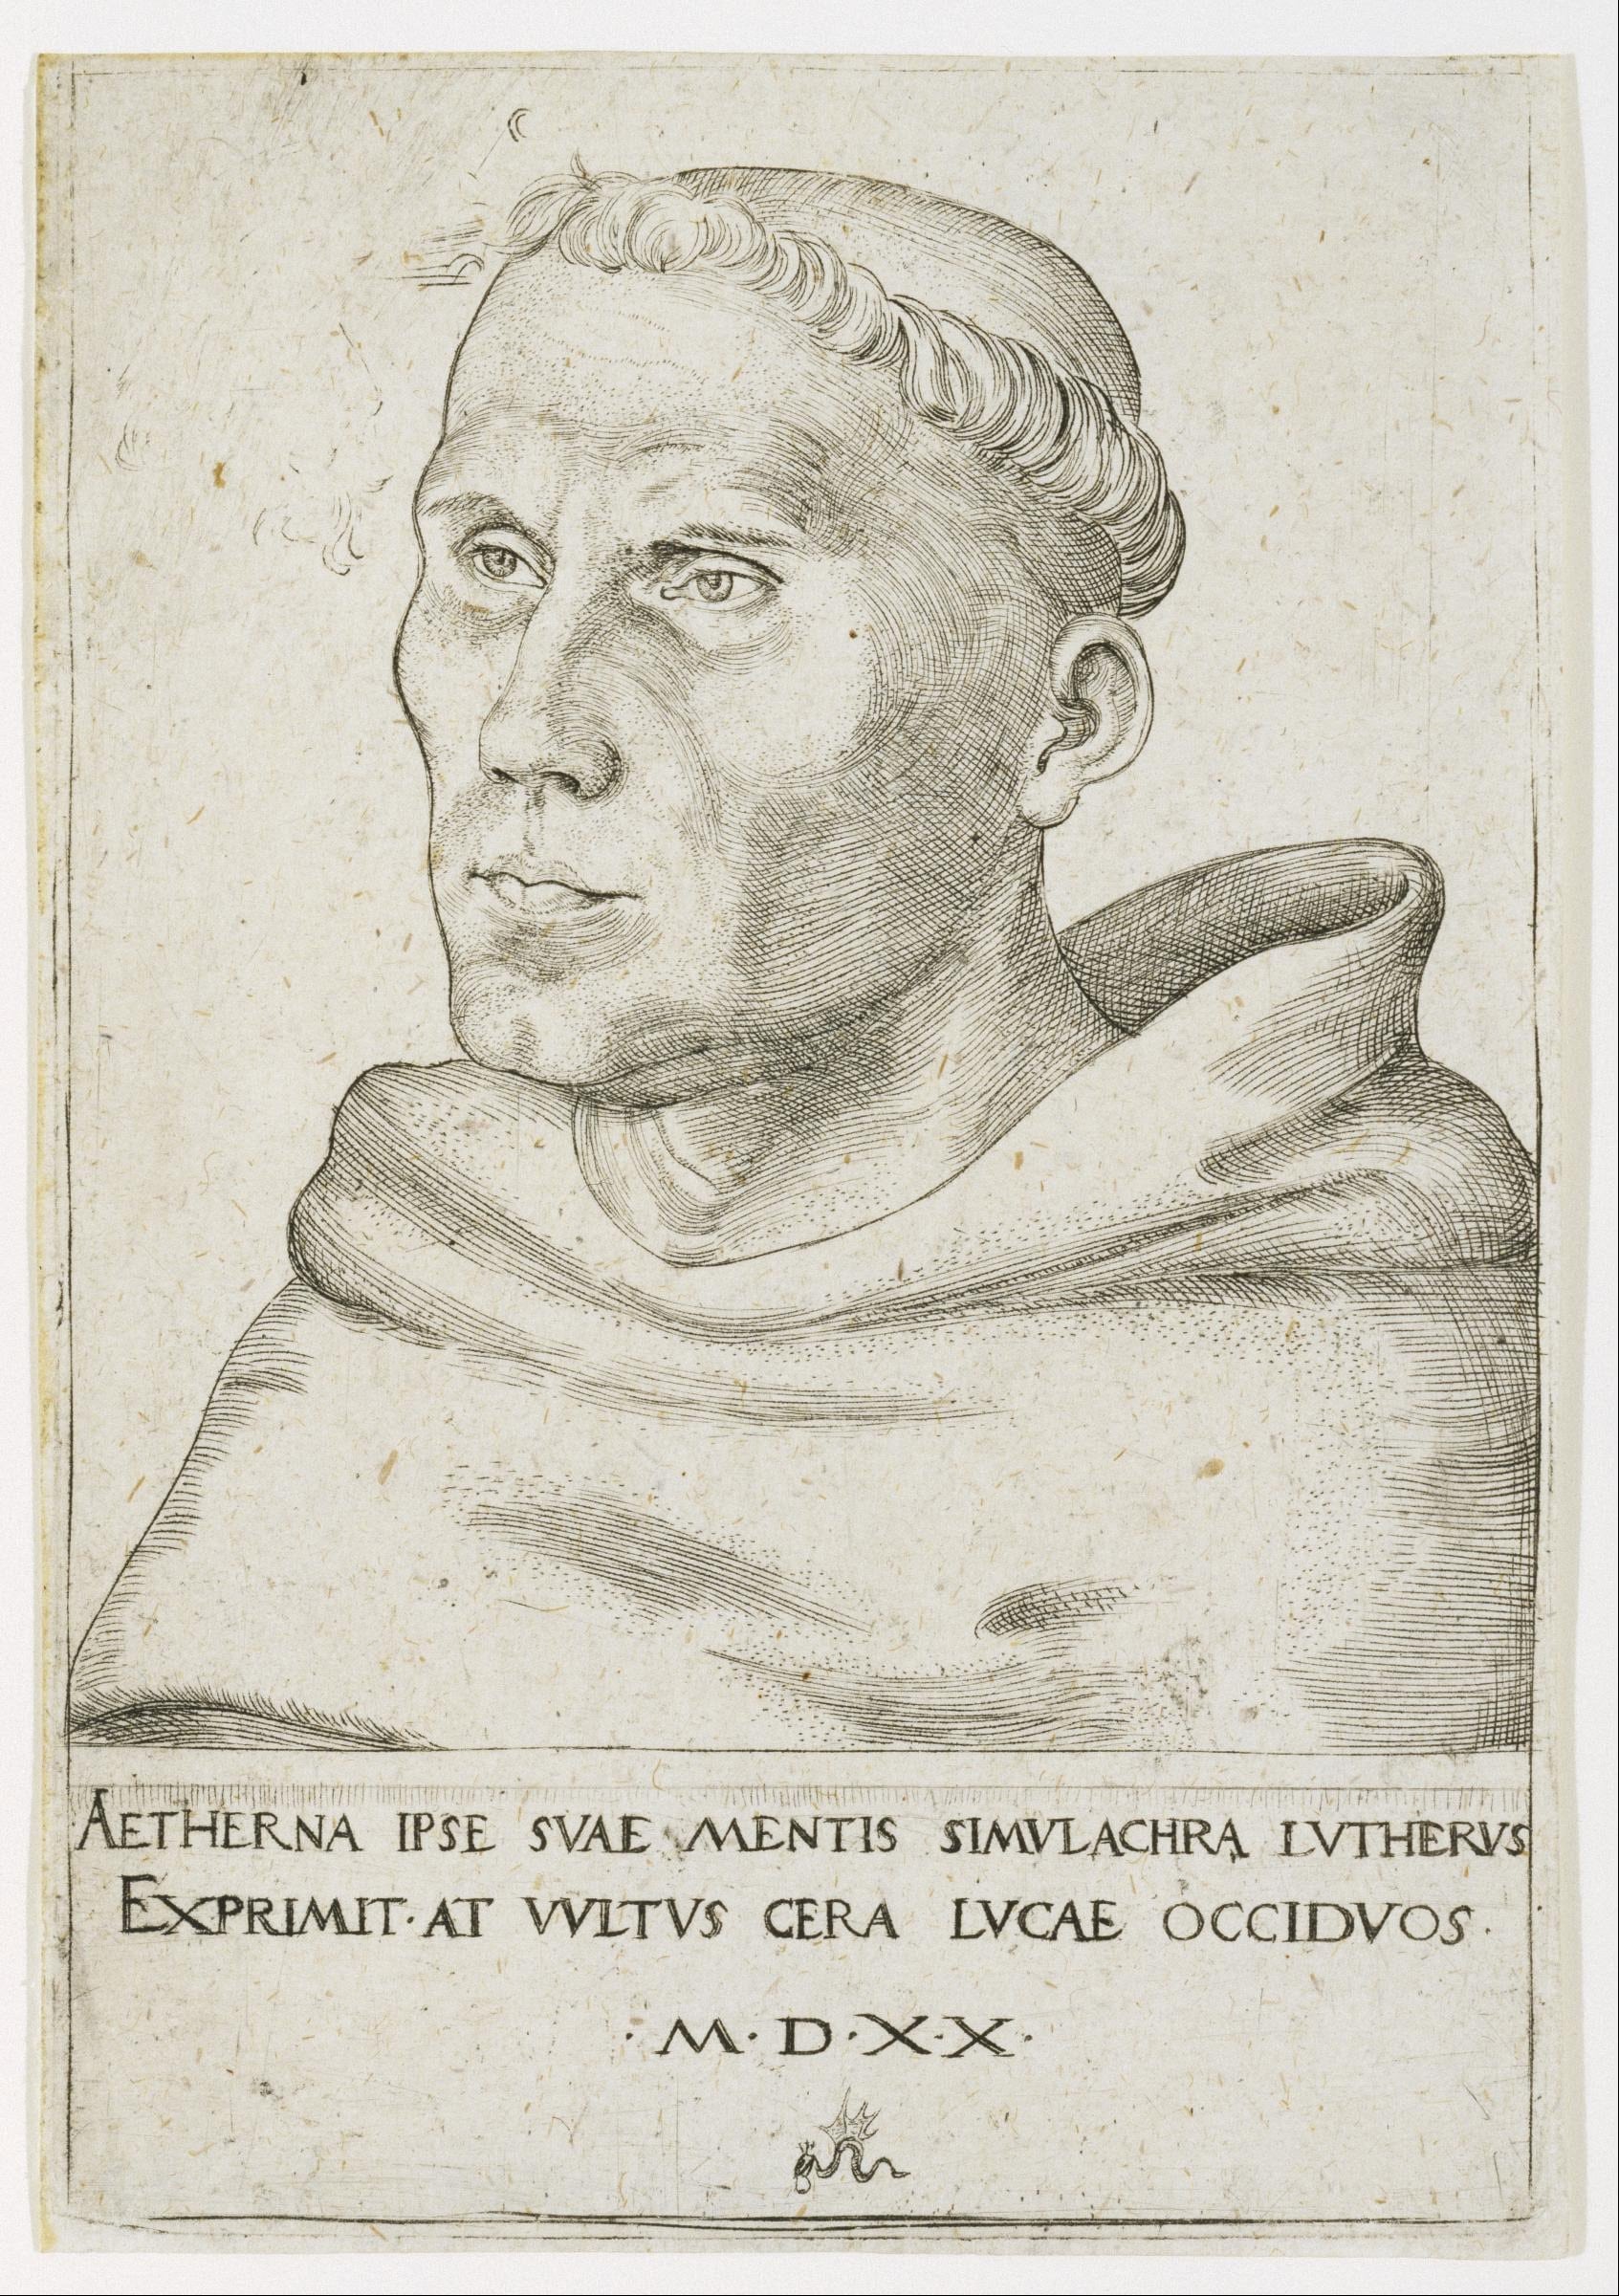 Martin Luther, Bust in Three-Quarter View. Engraving, on laid paper with watermark, from 1520 made by Lucas Cranach the Elder (1472–1553), German painter, draughtsman, printmaker and court painter. Collection/Credit: Museum of Fine Arts, Houston, USA. Public Domain.